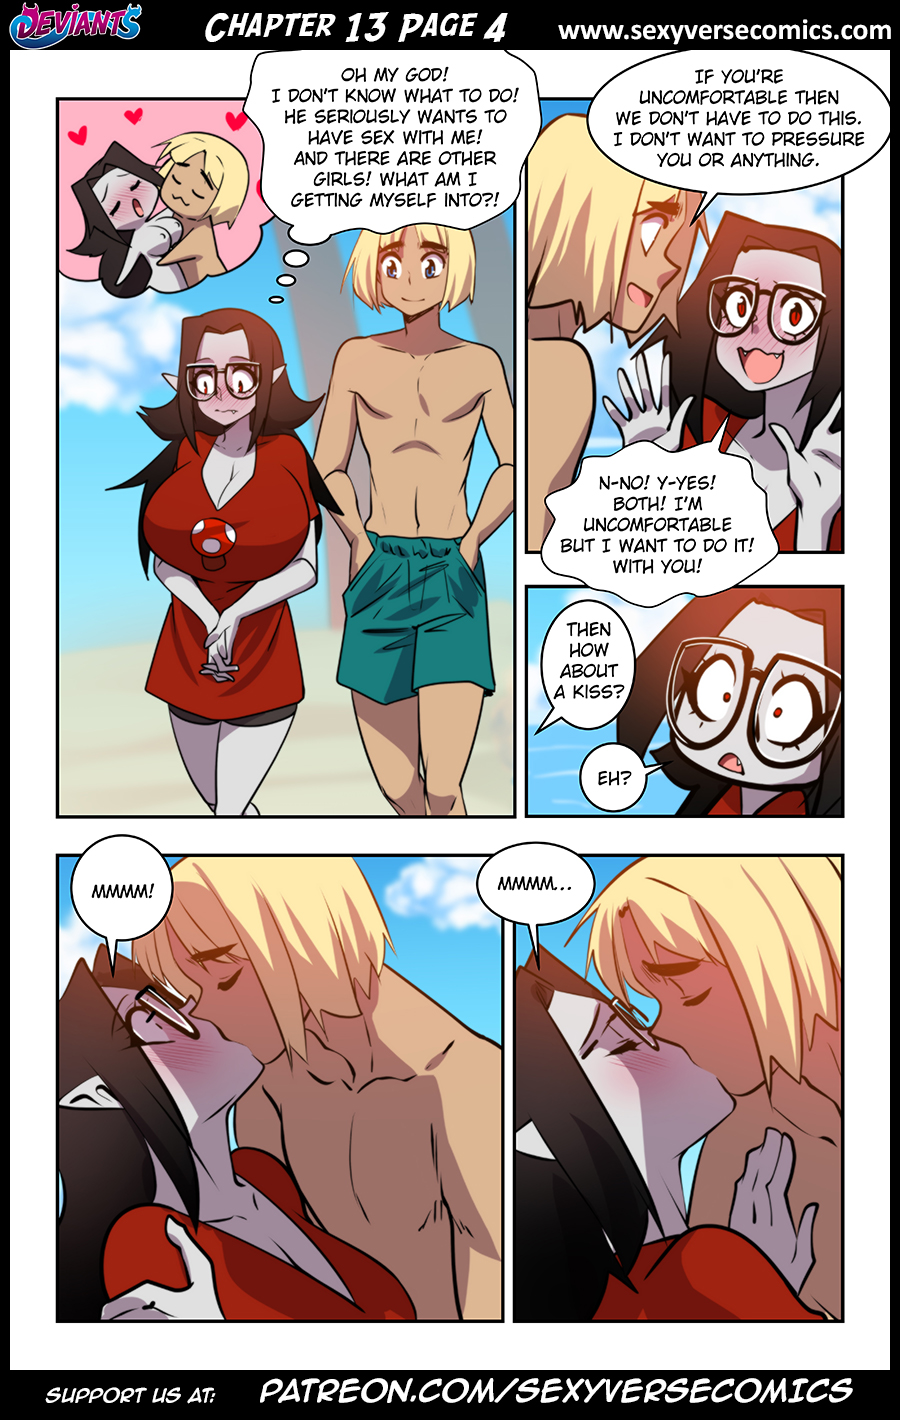 Deviants Chapter 13 Page 4